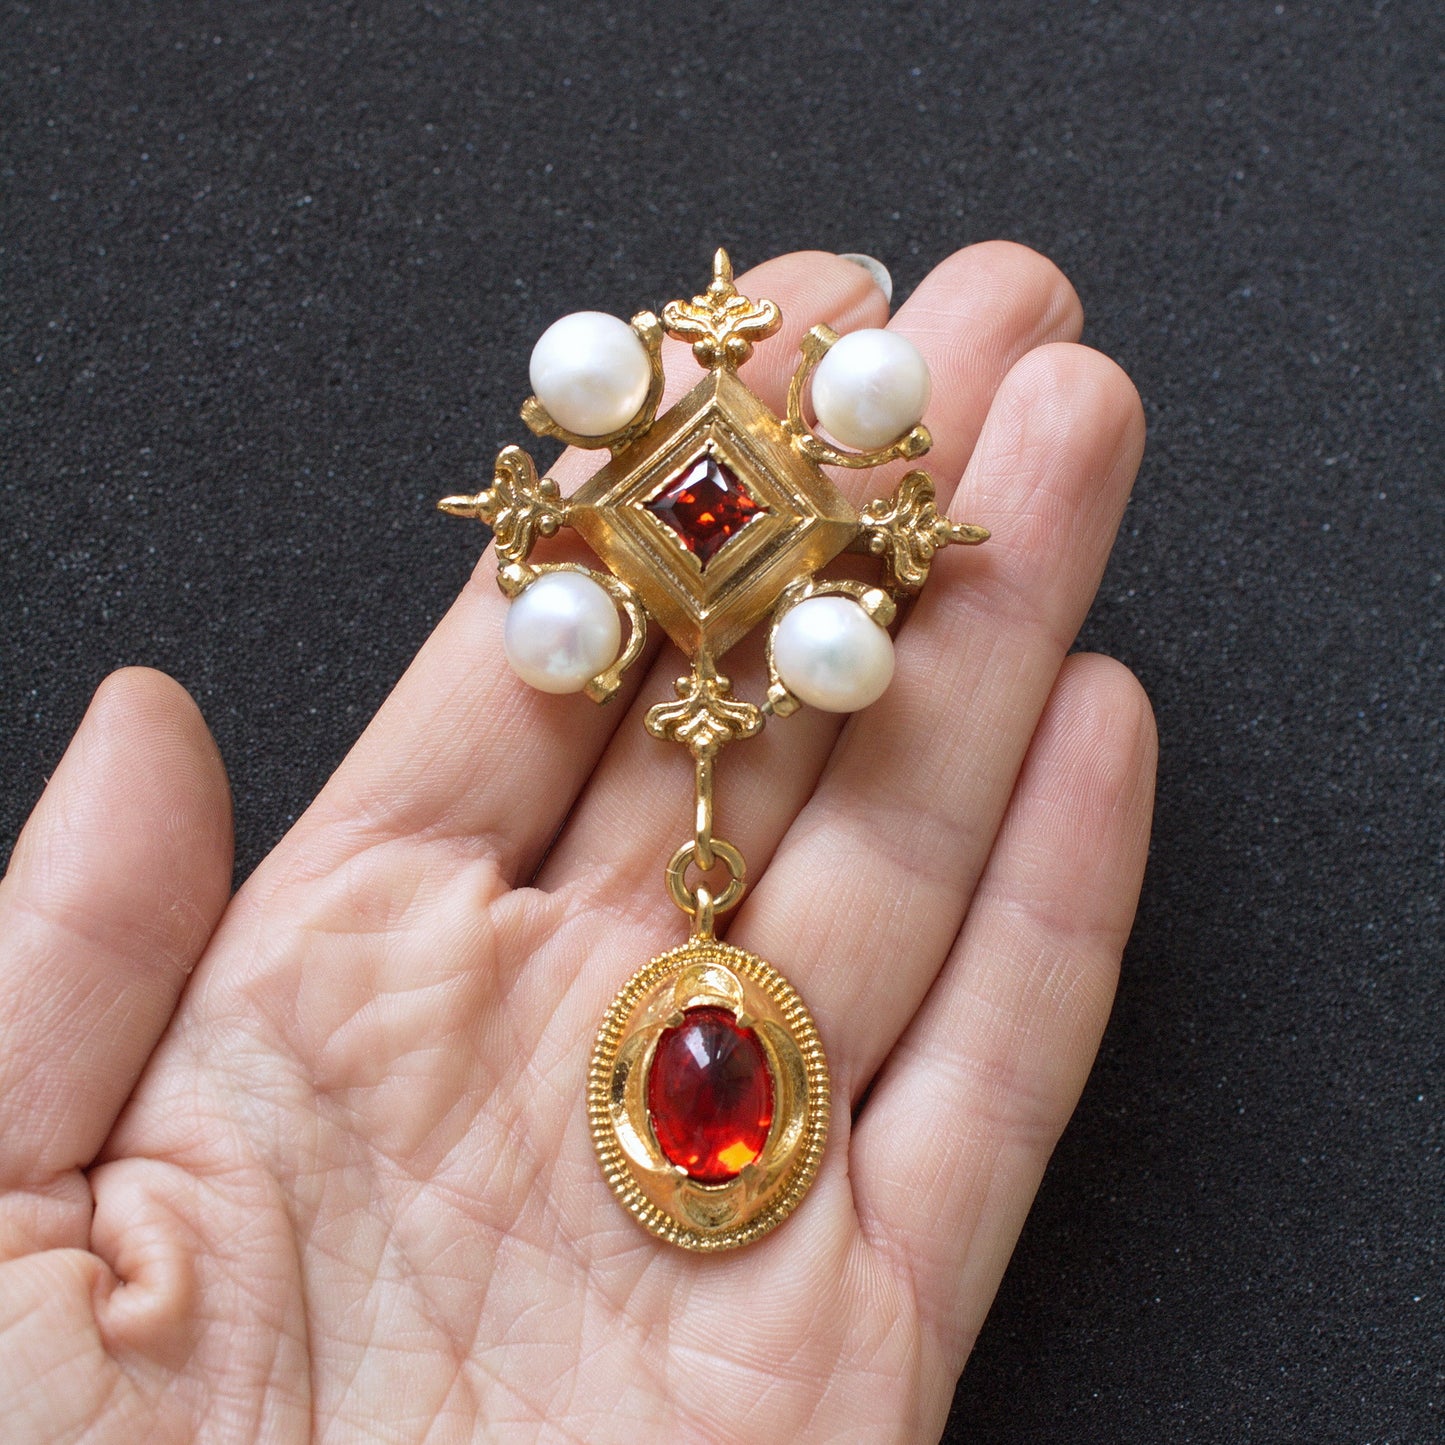 Renaissance Brooch with 4 Pearls a Red Glass Pendant